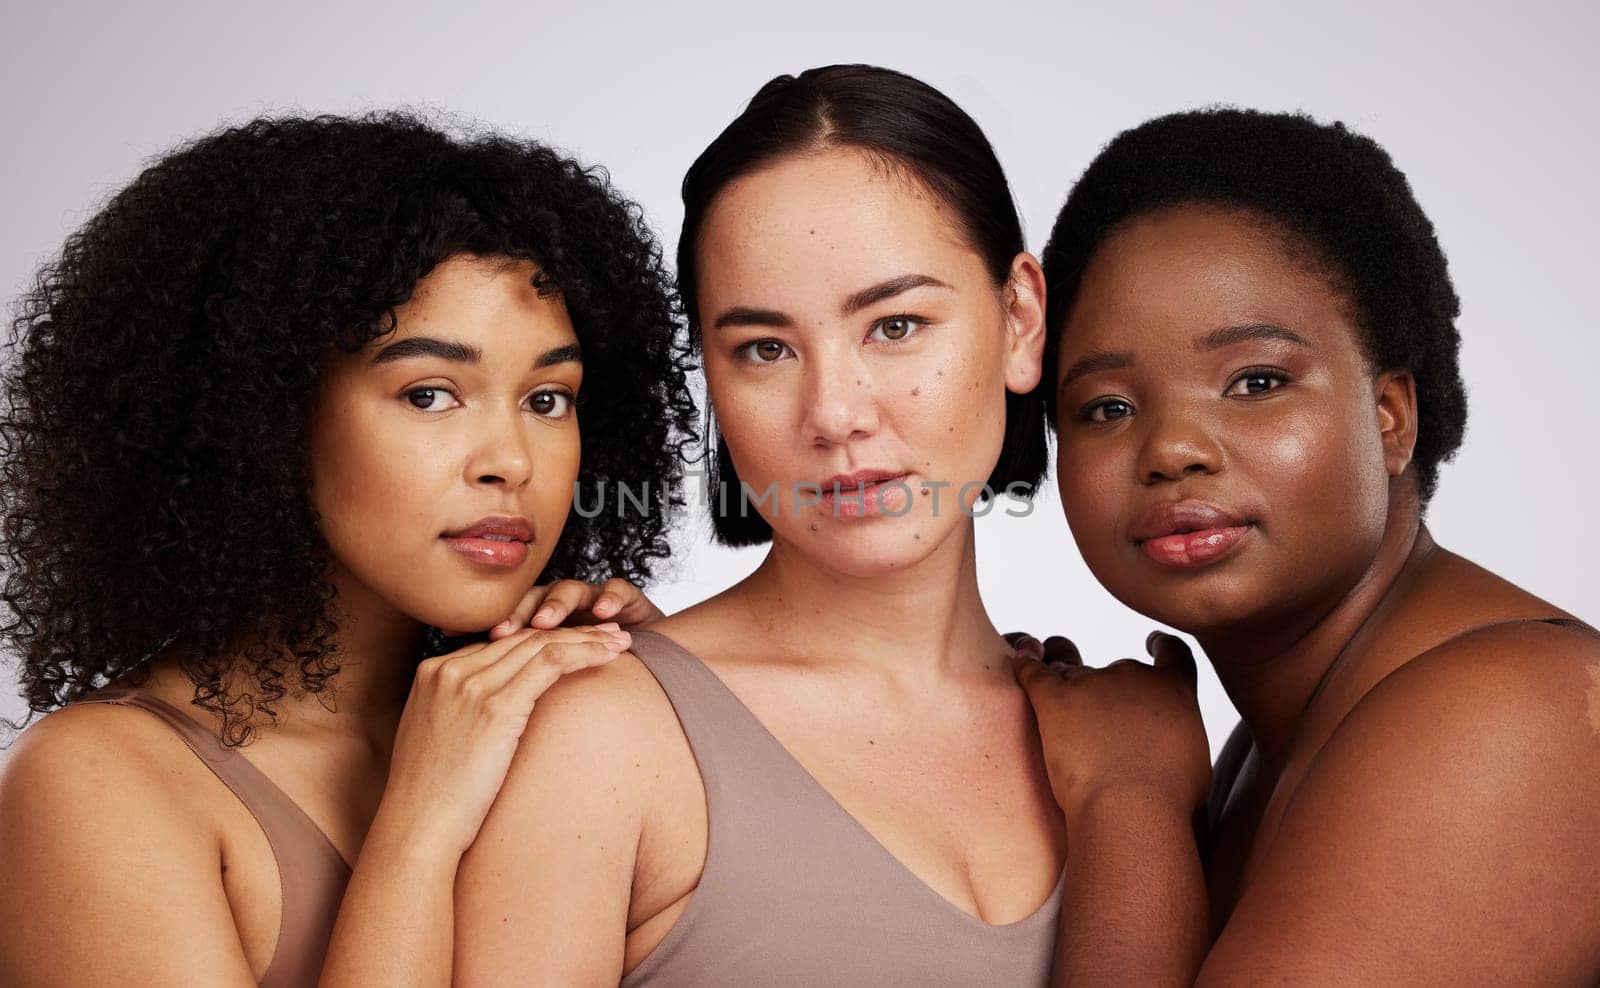 Portrait, beauty and diversity with woman friends in studio on a gray background together for skincare. Face, makeup and natural with a female model group posing to promote support or inclusion.